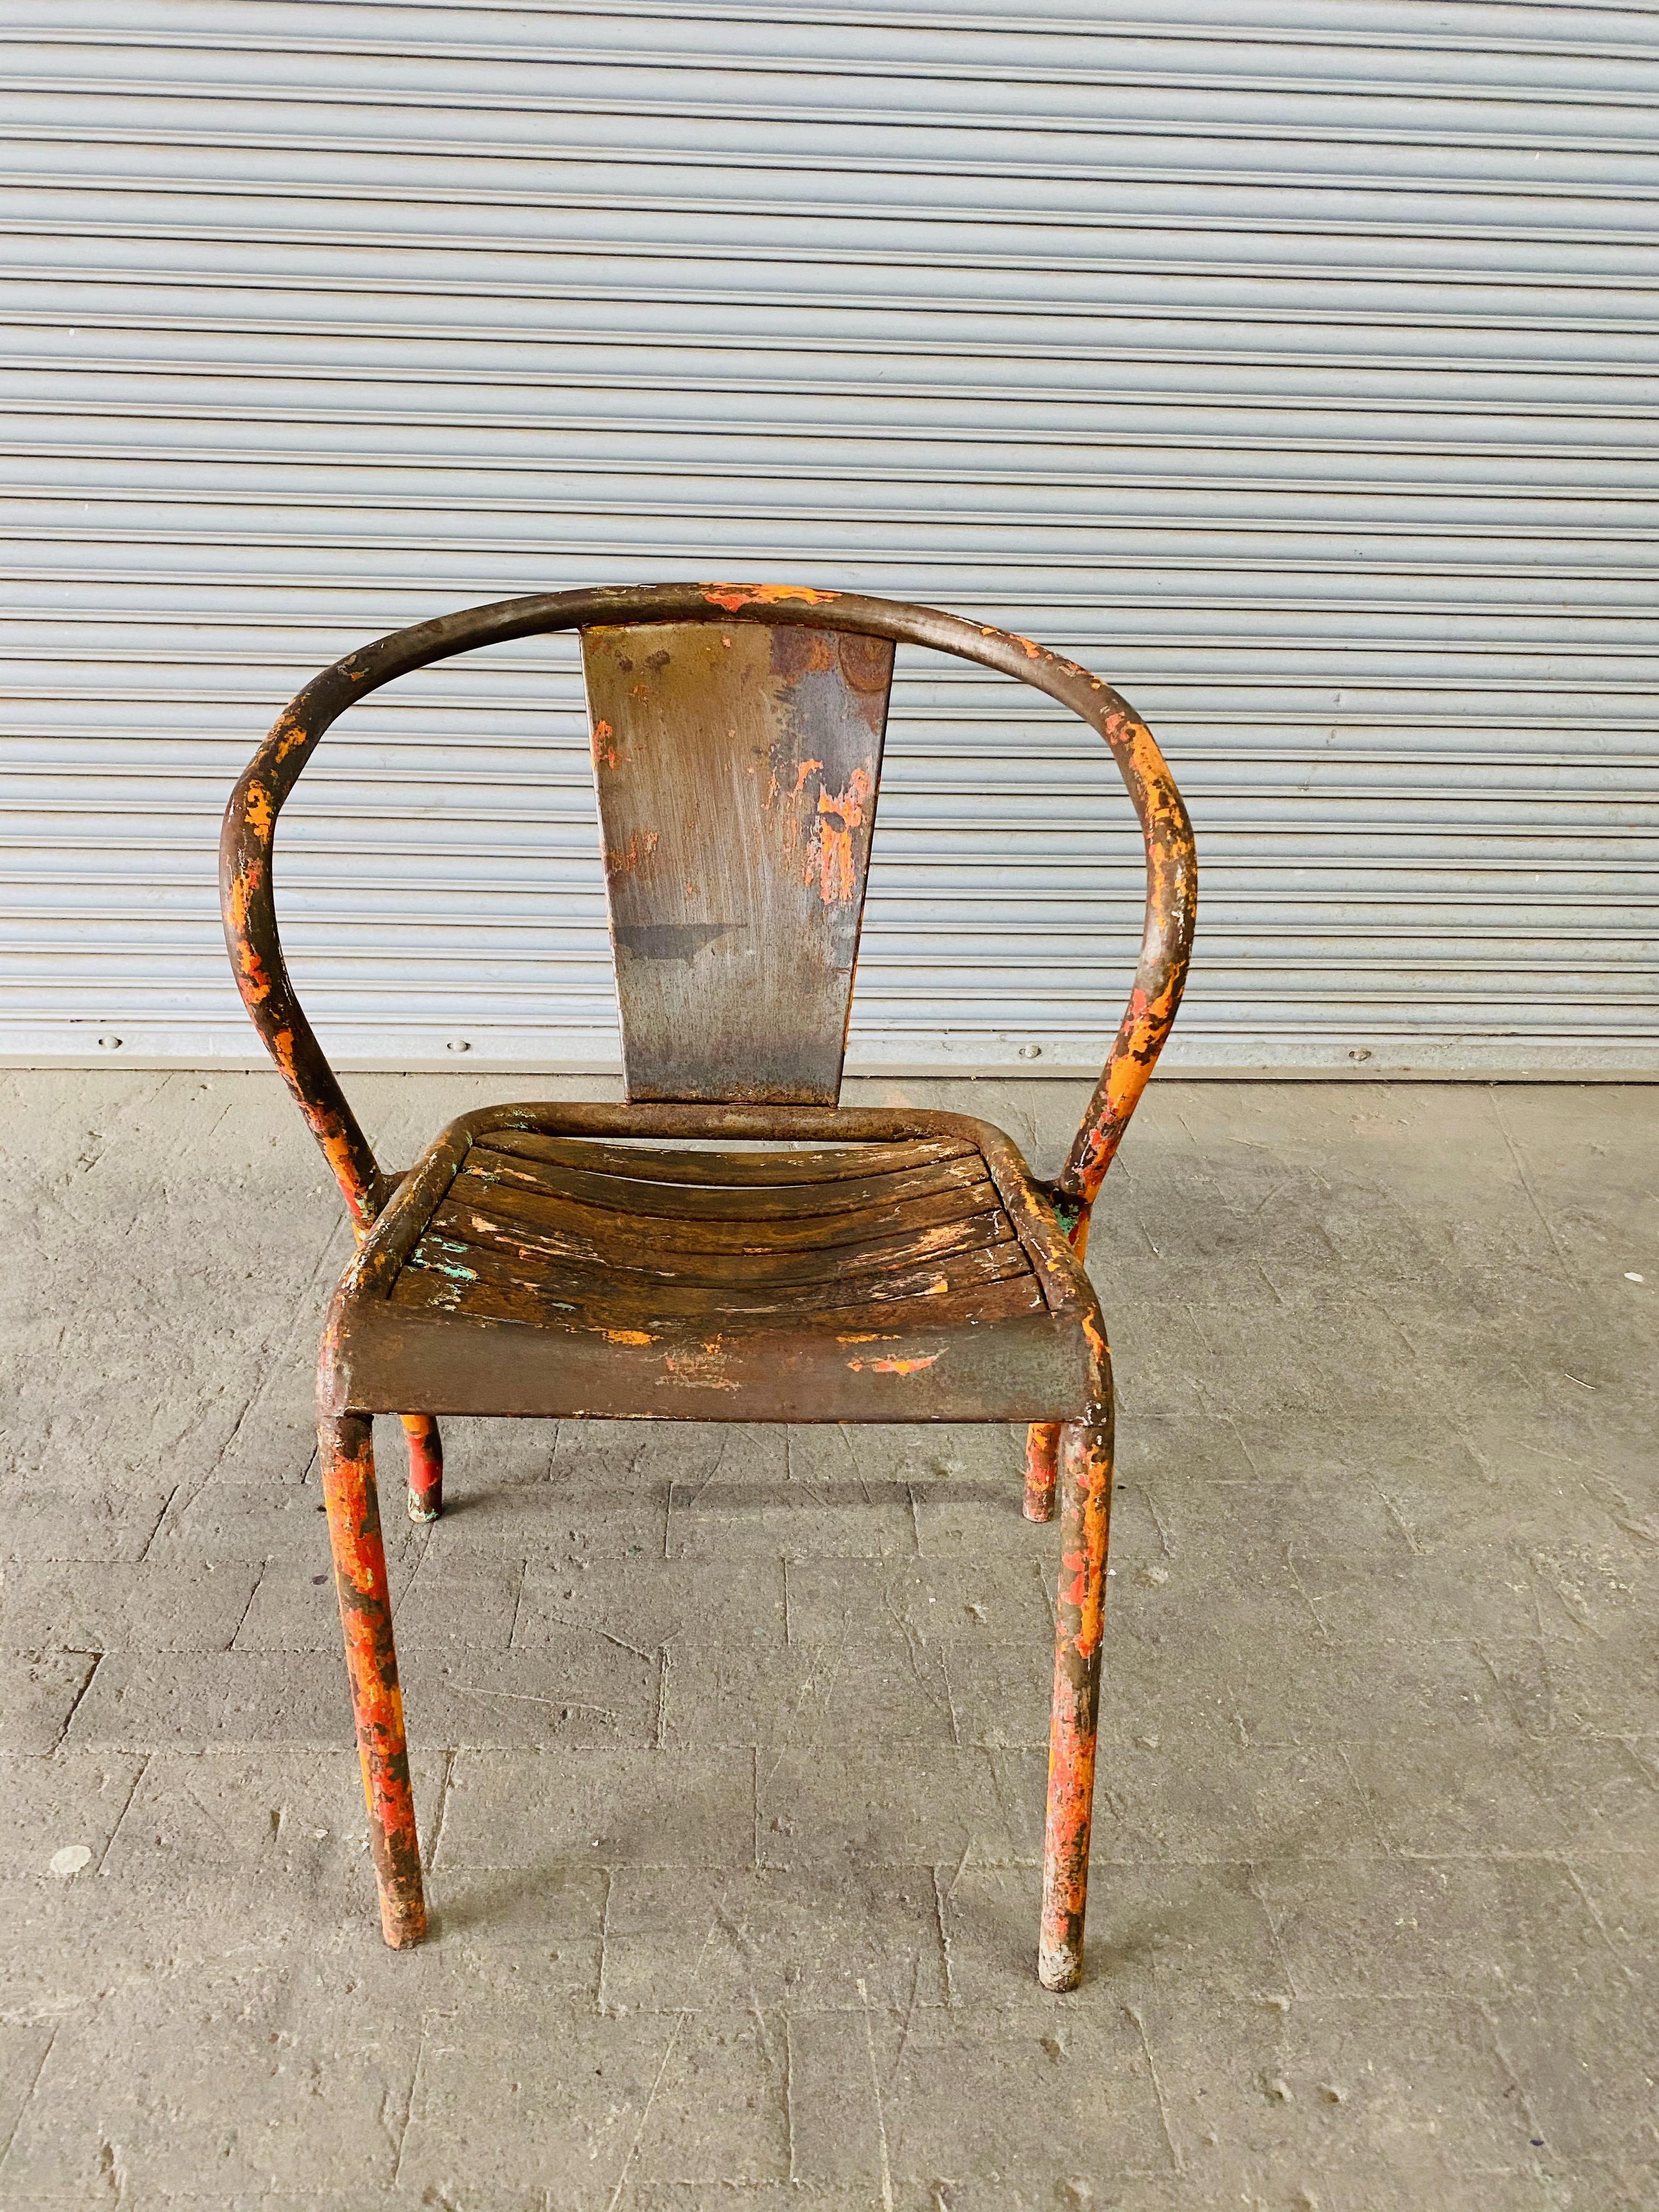 Early 20th Century Pair of French Tolix Industrial Chairs with Distressed Orange Paint Finish